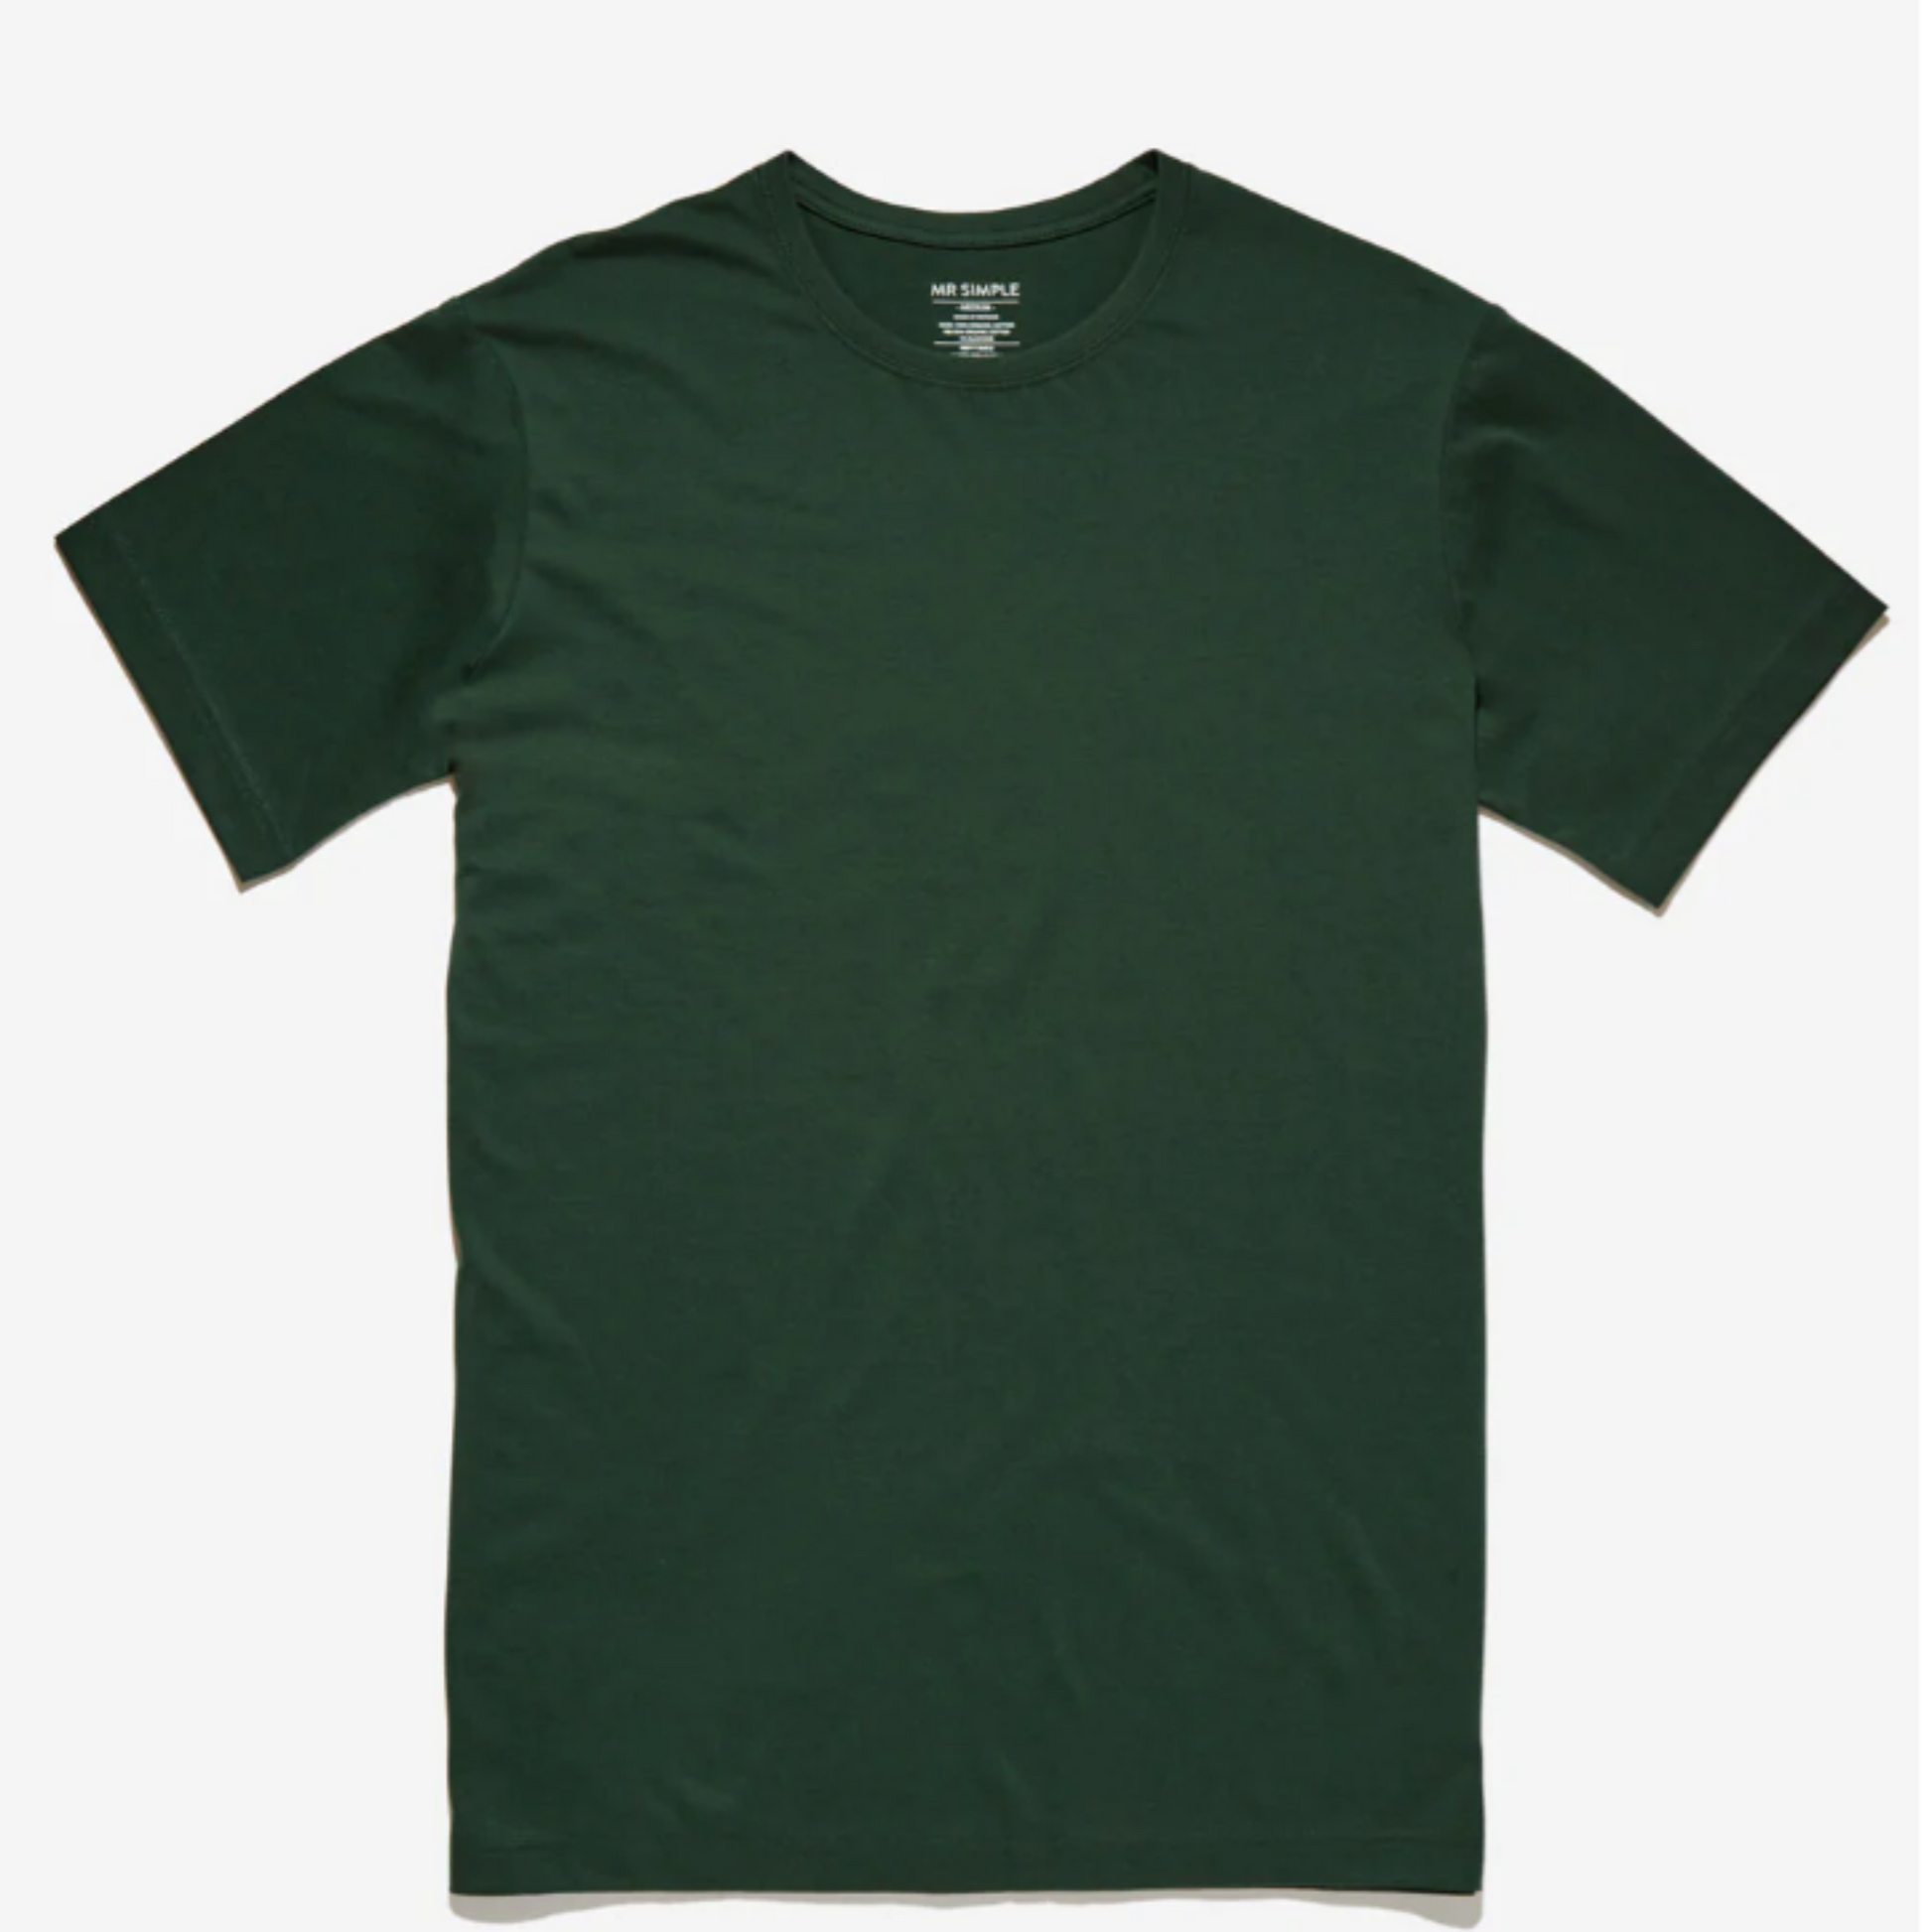 The Bottle Green Reginald tee is the foundation of the Mr Simple collection. A perfect everyday t-shirt that you'll love to wear day after day.